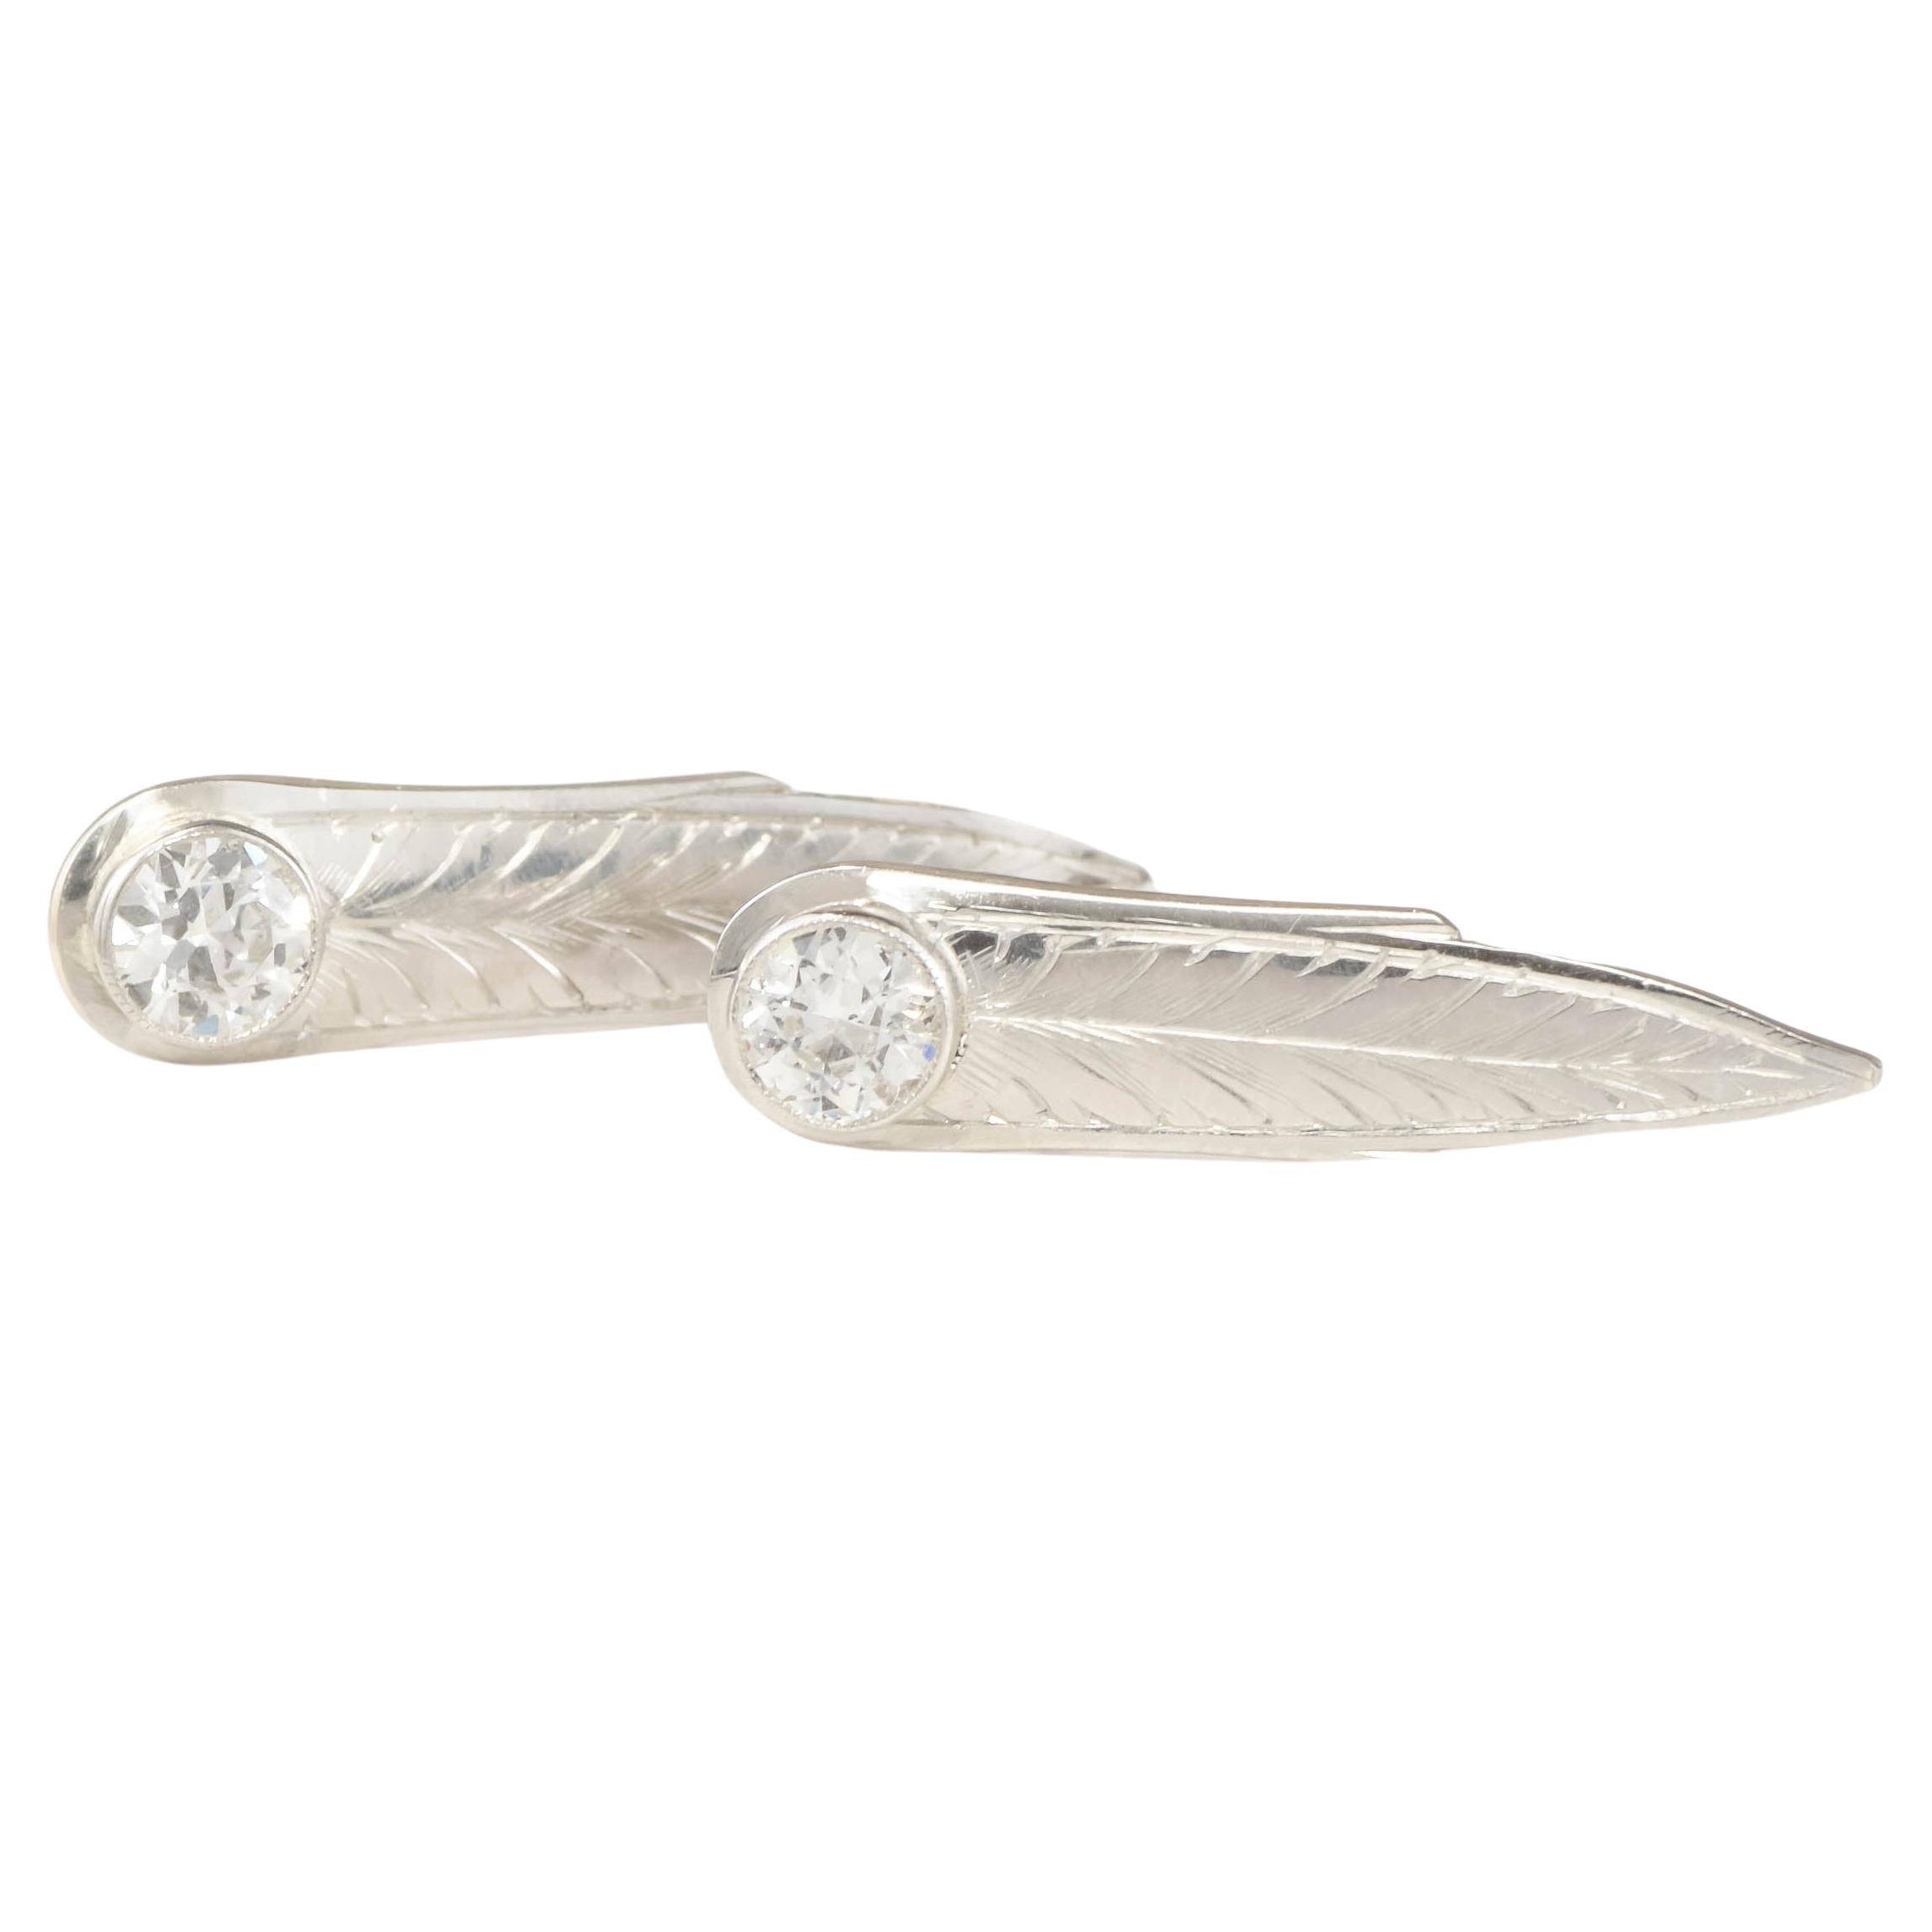 Once part of an elegant 1920's Art Deco period brooch, these stylish earrings combine fiery European cut diamonds with a vertical drop of hand engraved leaves or feathers.  Worn like studs, they have threaded posts for extra security.

Crafted of